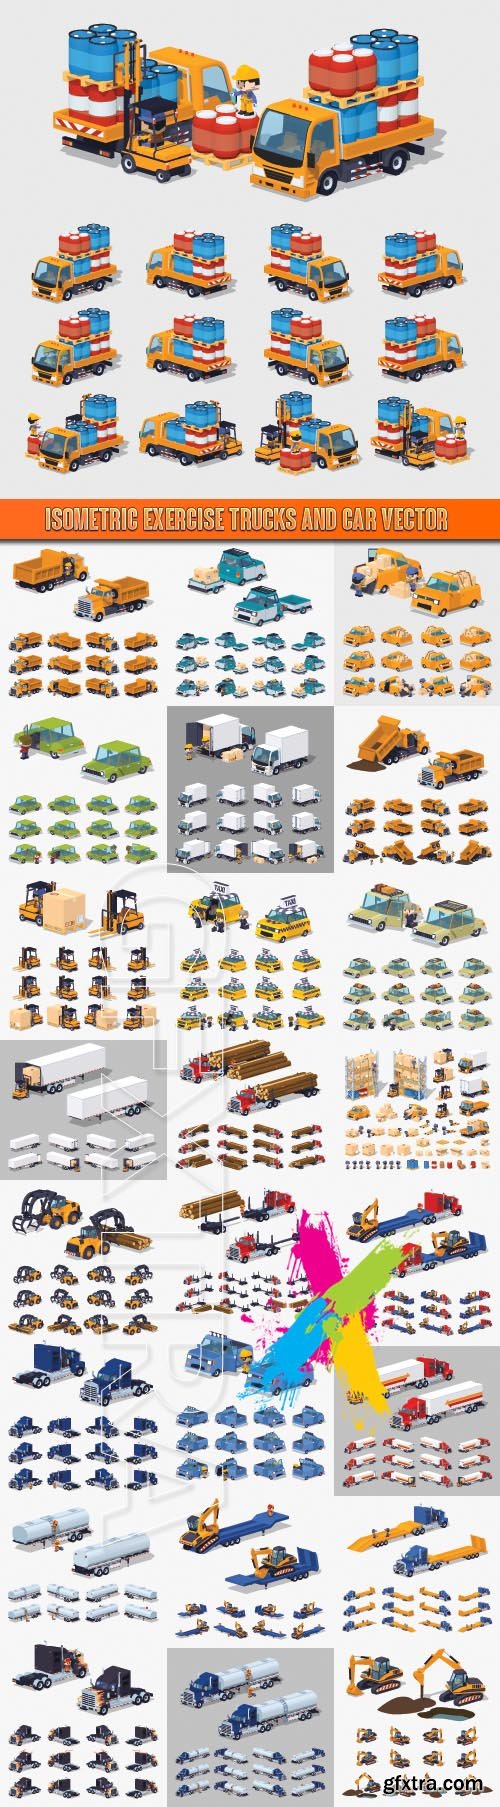 Isometric exercise trucks and car vector